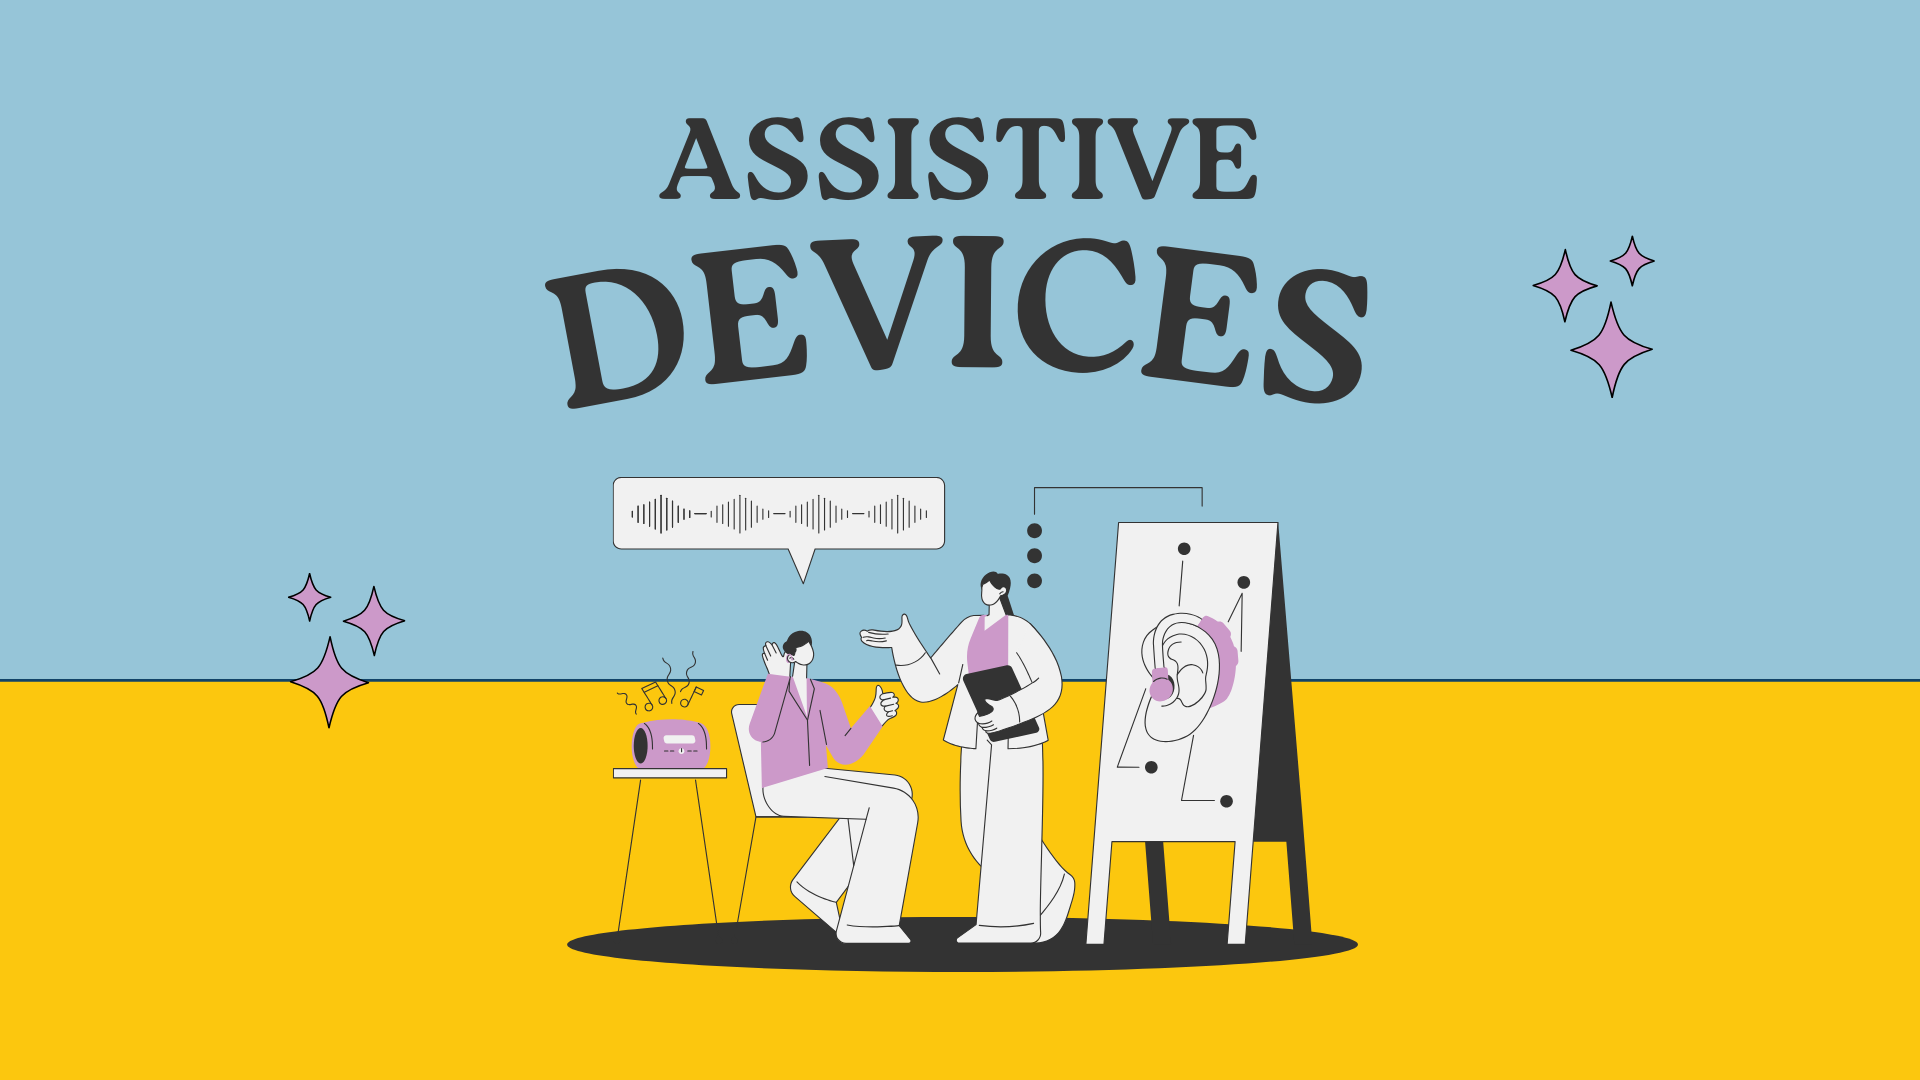 Beyond Barriers: The Power of Assistive Technology